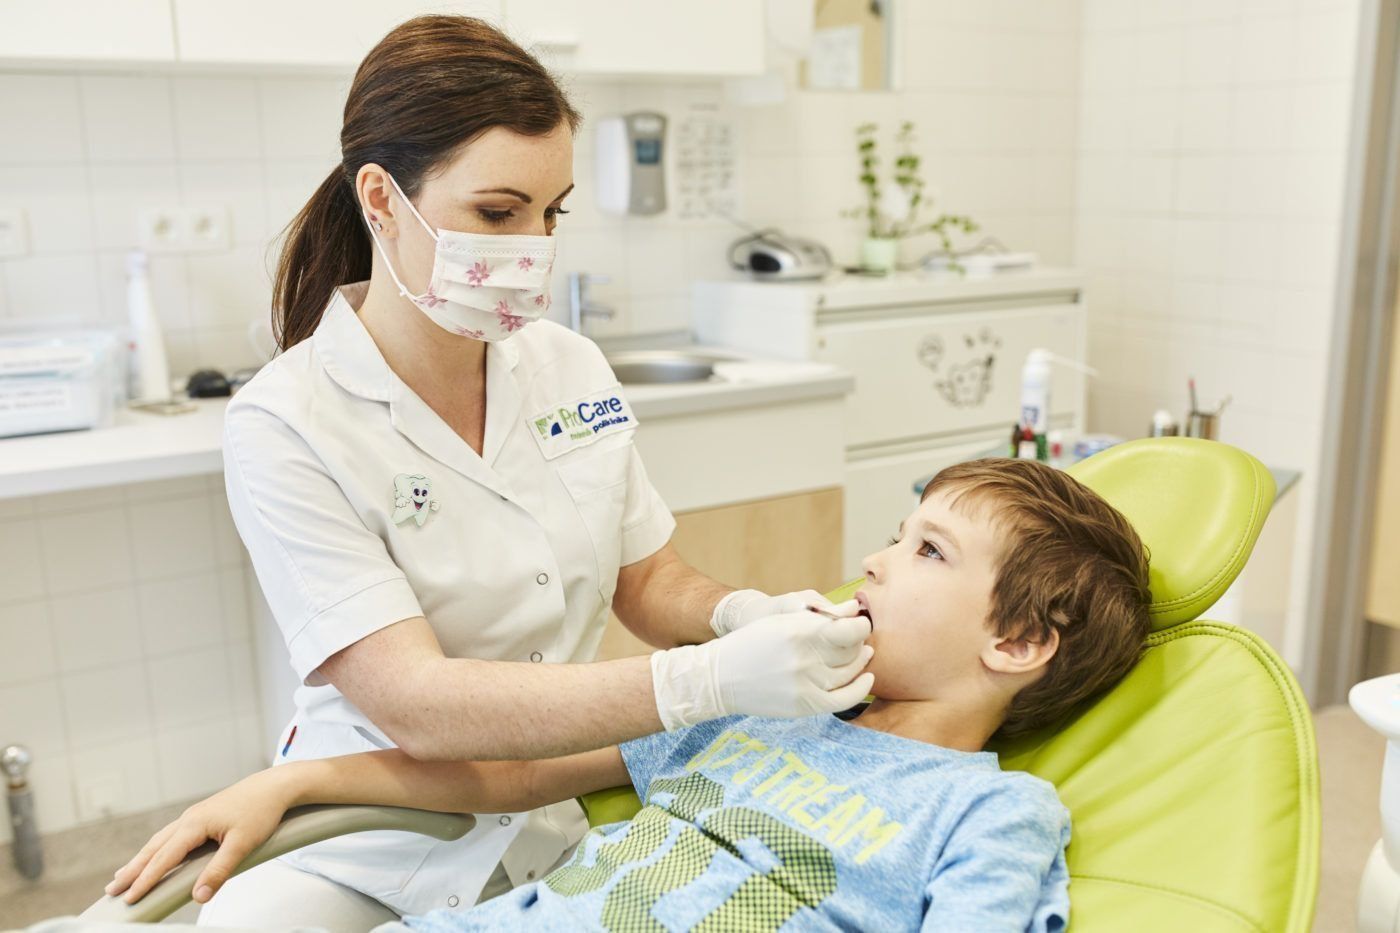 The best paid dental clinics for children in Omsk in 2022